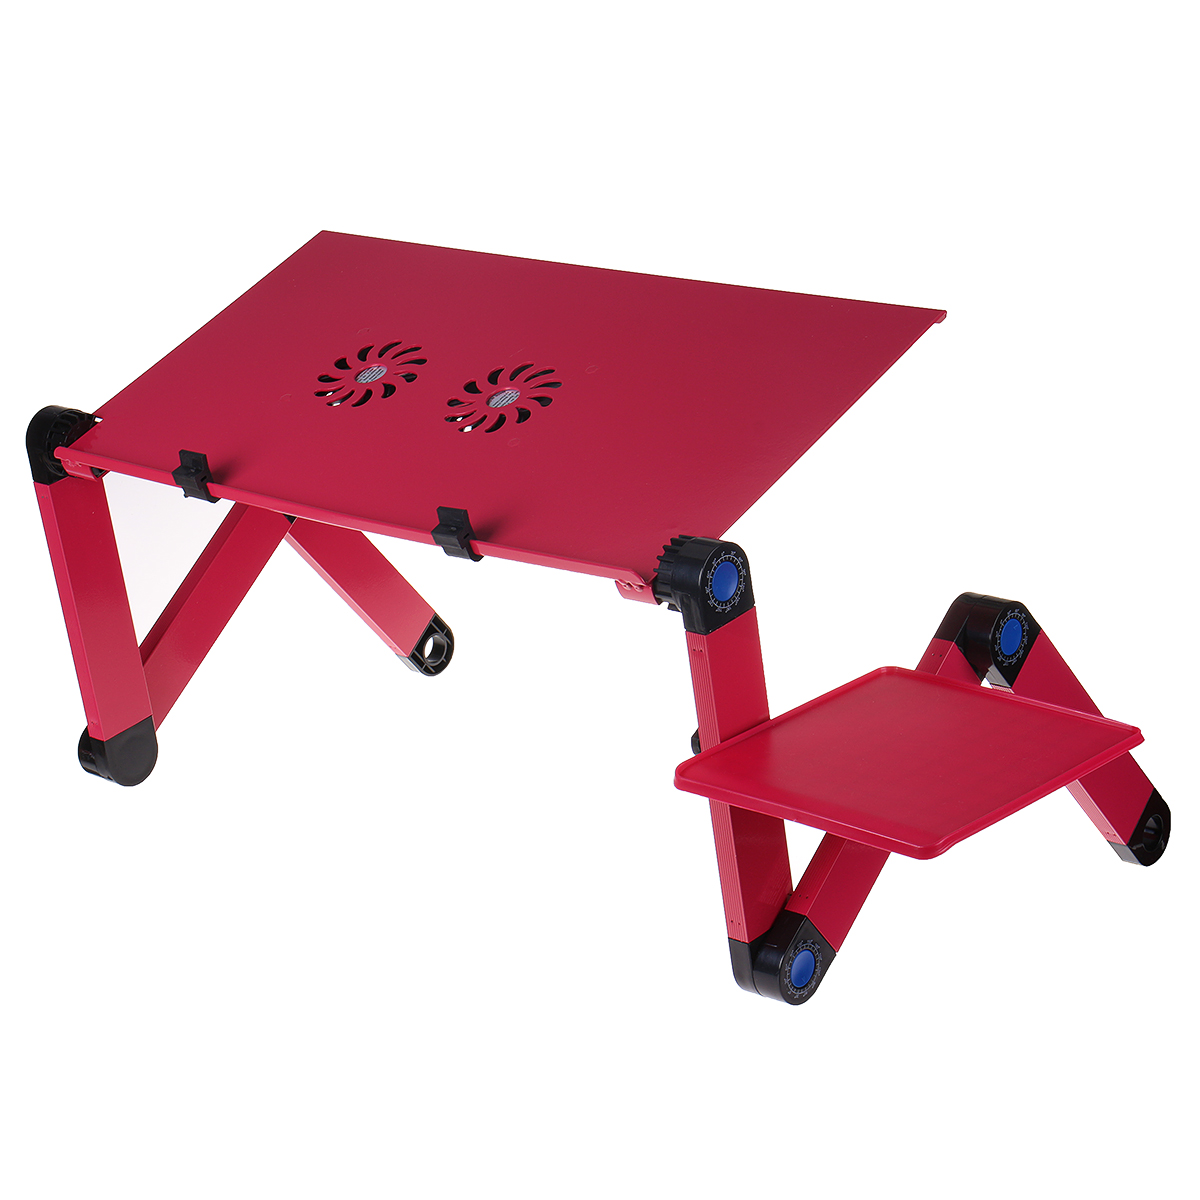 Cooling-Laptop-Desk-360-Degree-Aluminum-Alloy-Adjustable-Foldable-Cooling-Notebook-Table-for-Sofa-Be-1786133-20